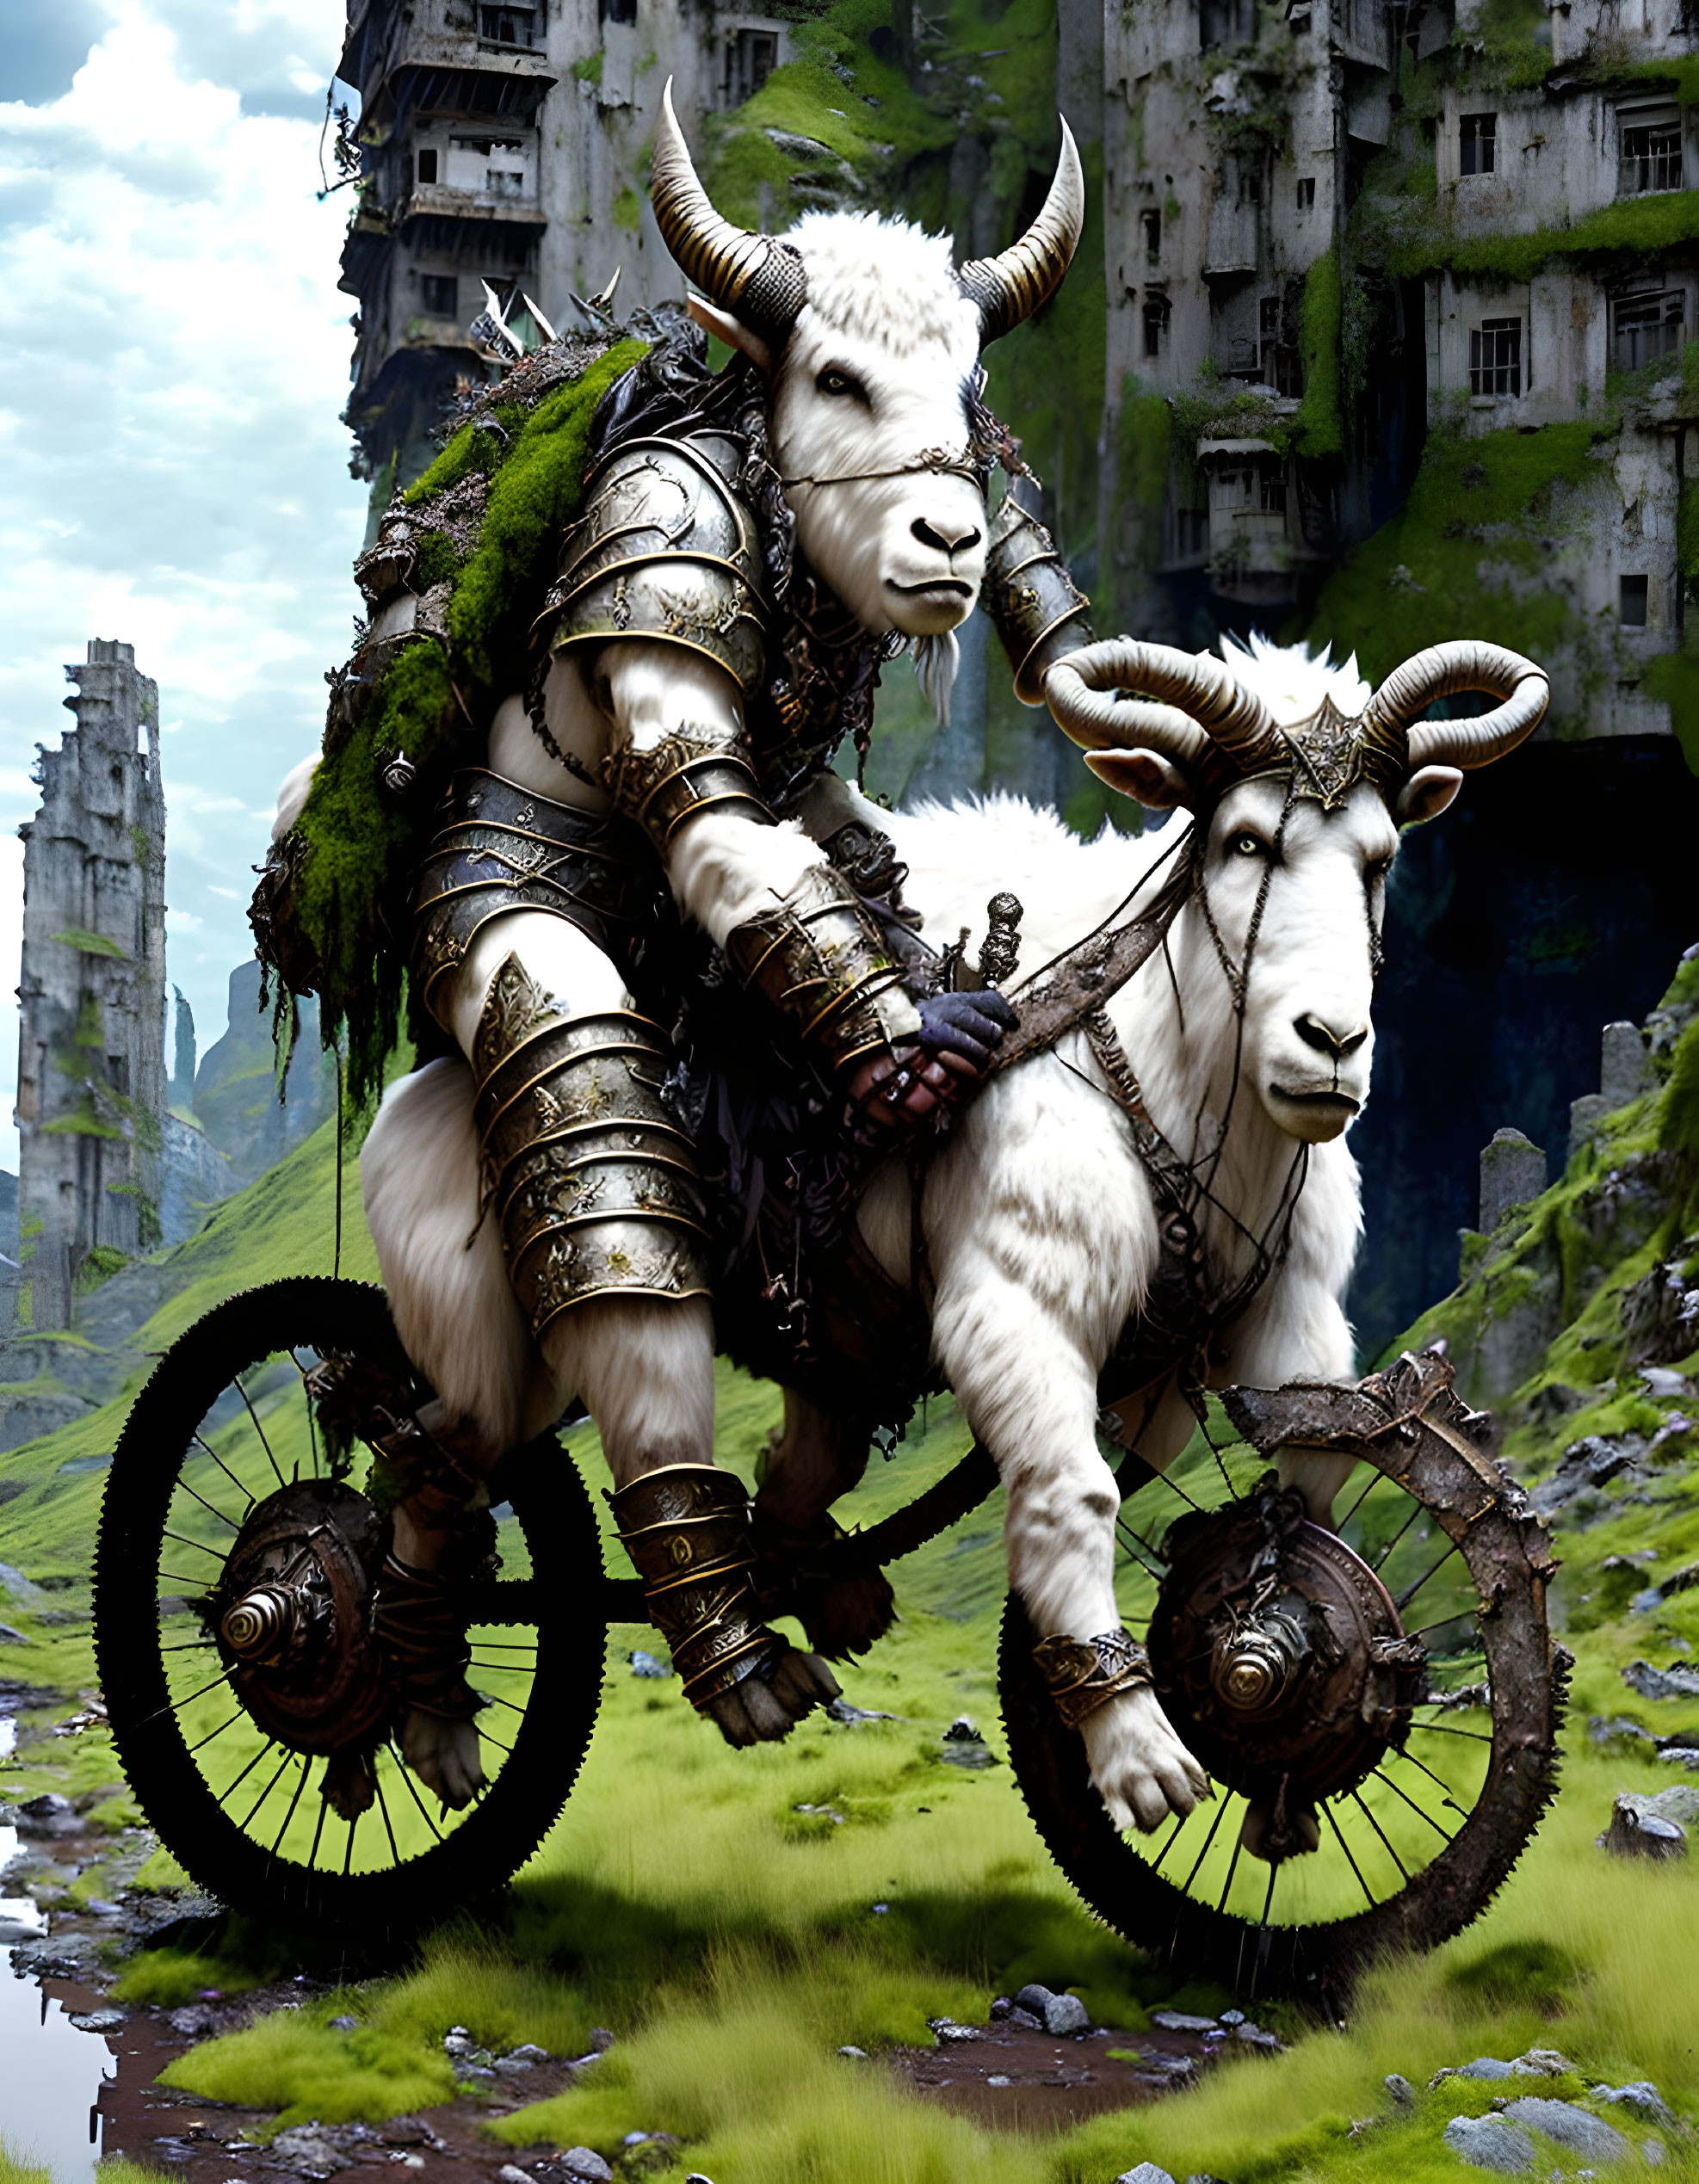 Two armored goats in ancient ruins and greenery